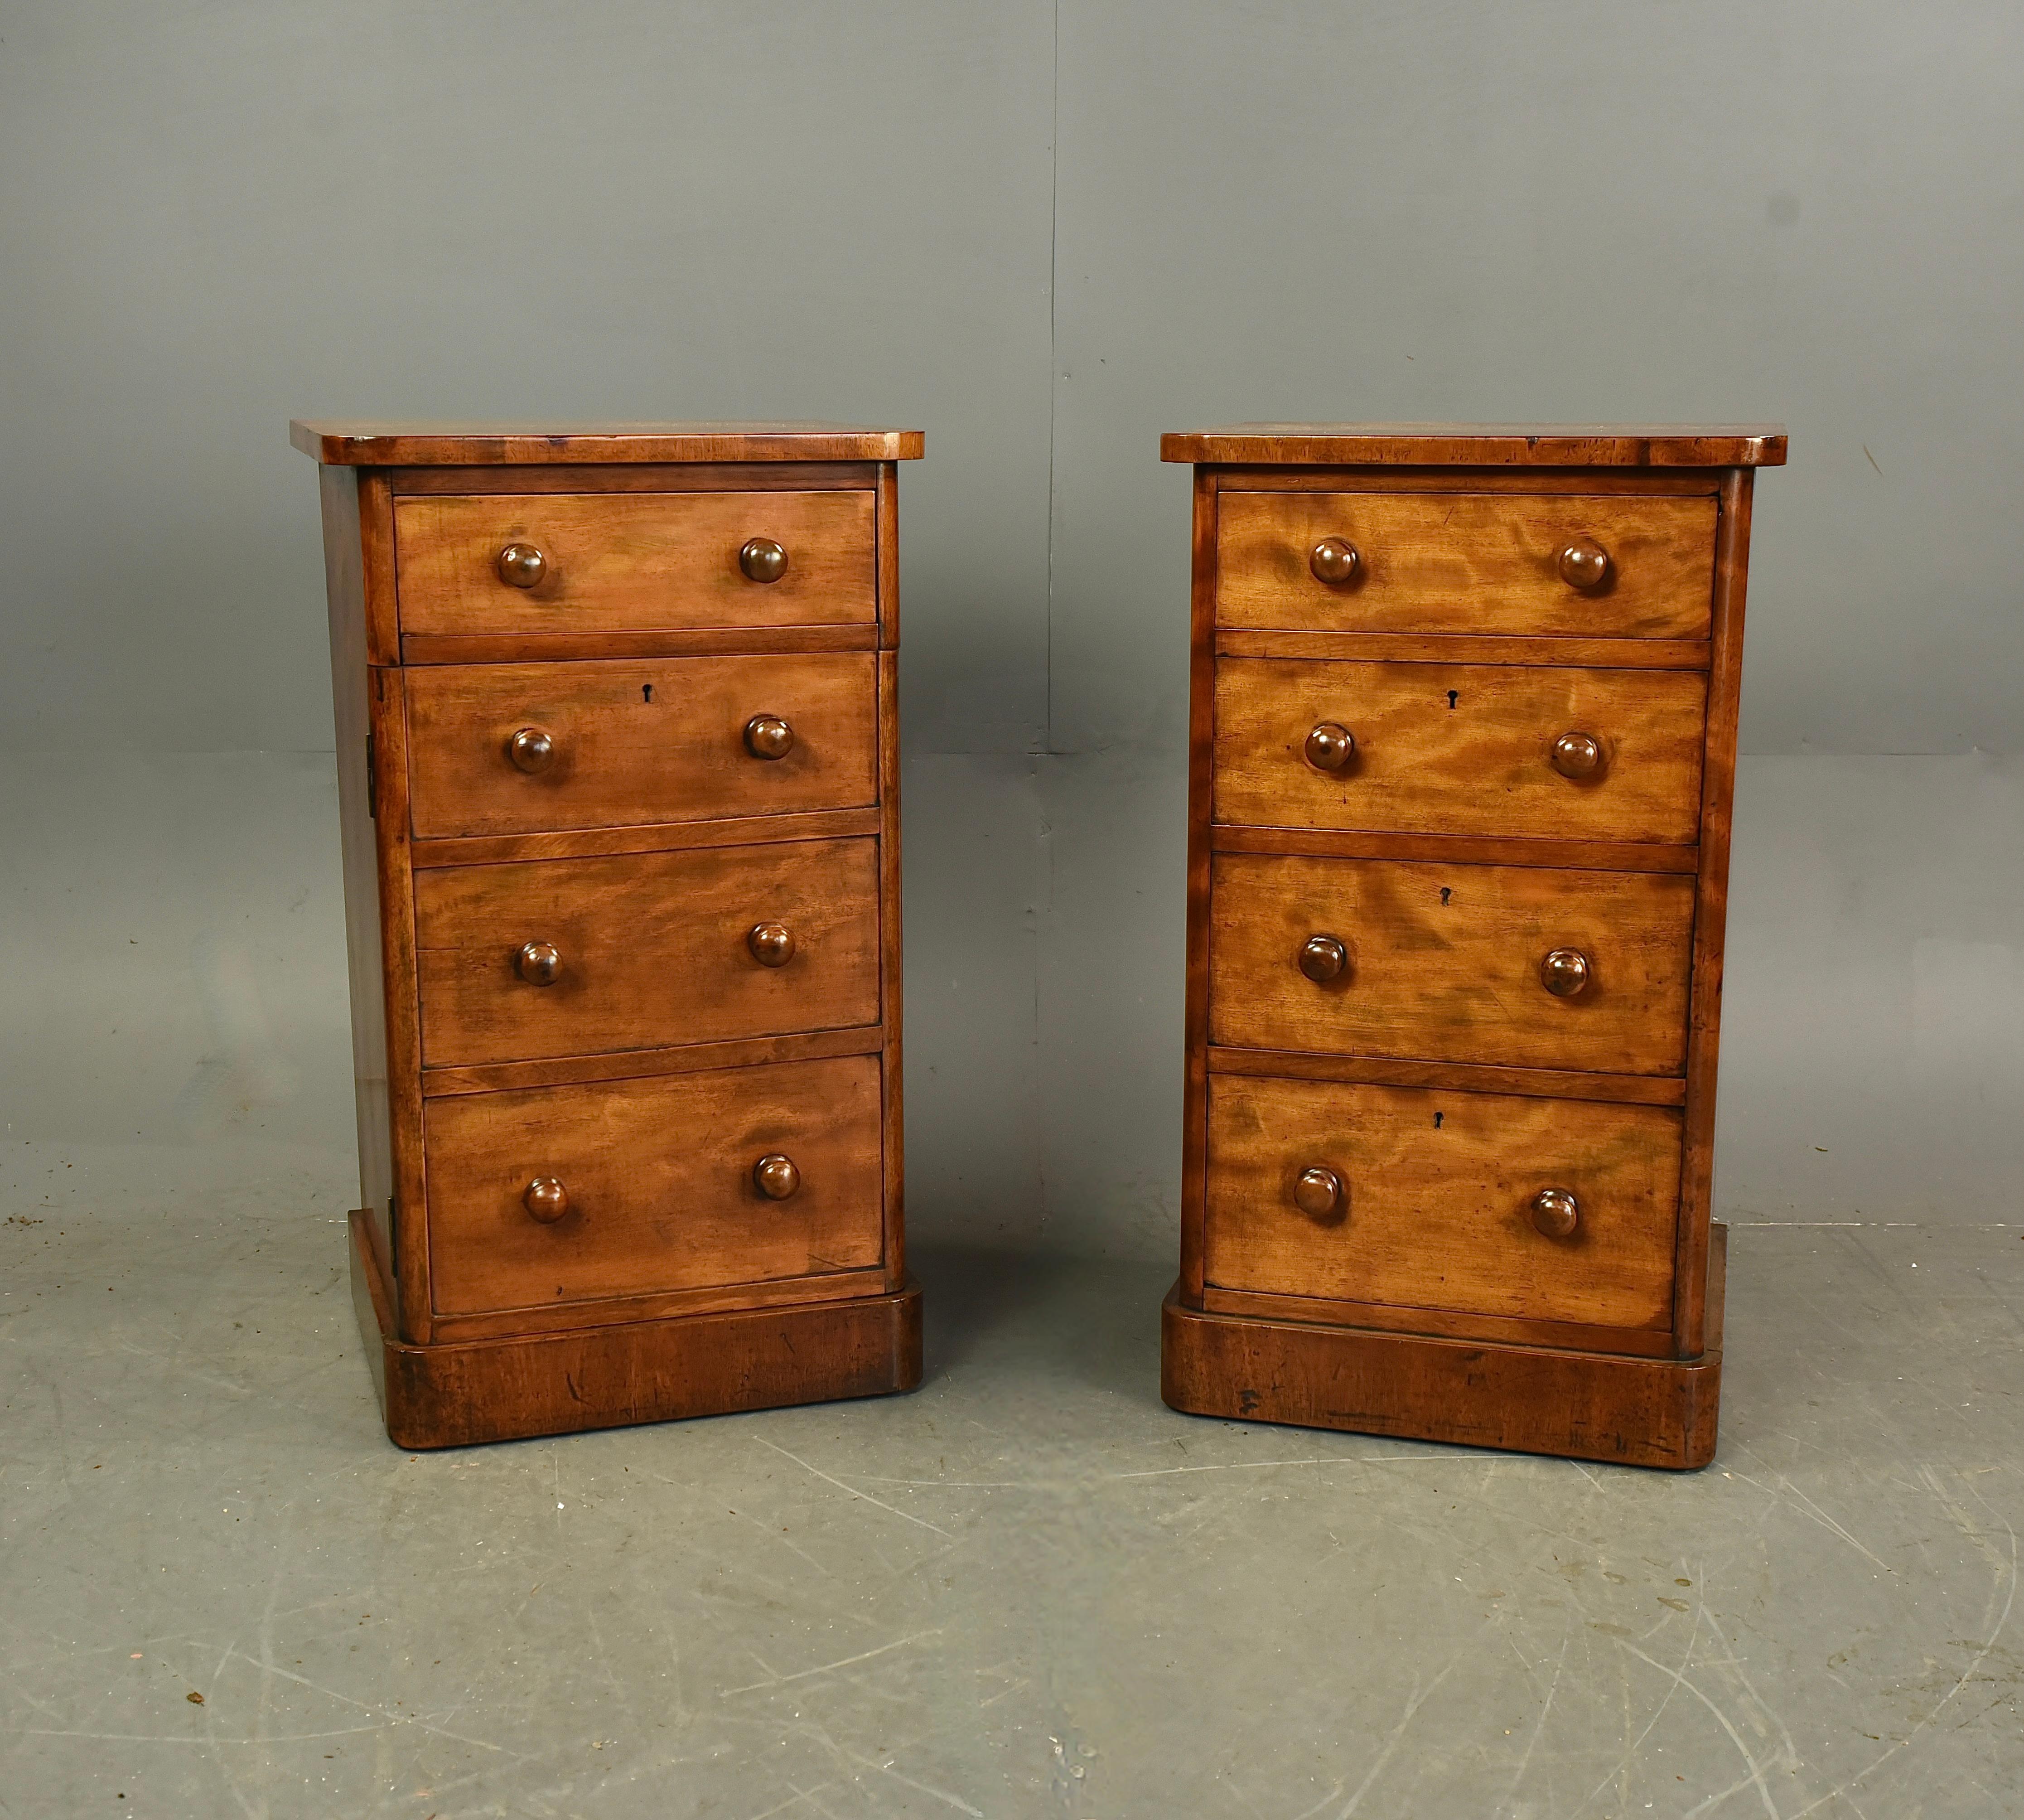 A wonderful pair of satin walnut bedside chests of drawers circa 1870 .
The bedside chests are a original pair one have dummy drawers to reveal a cupboard with a single drawer above and the other has four graduating drawers .
They are in great